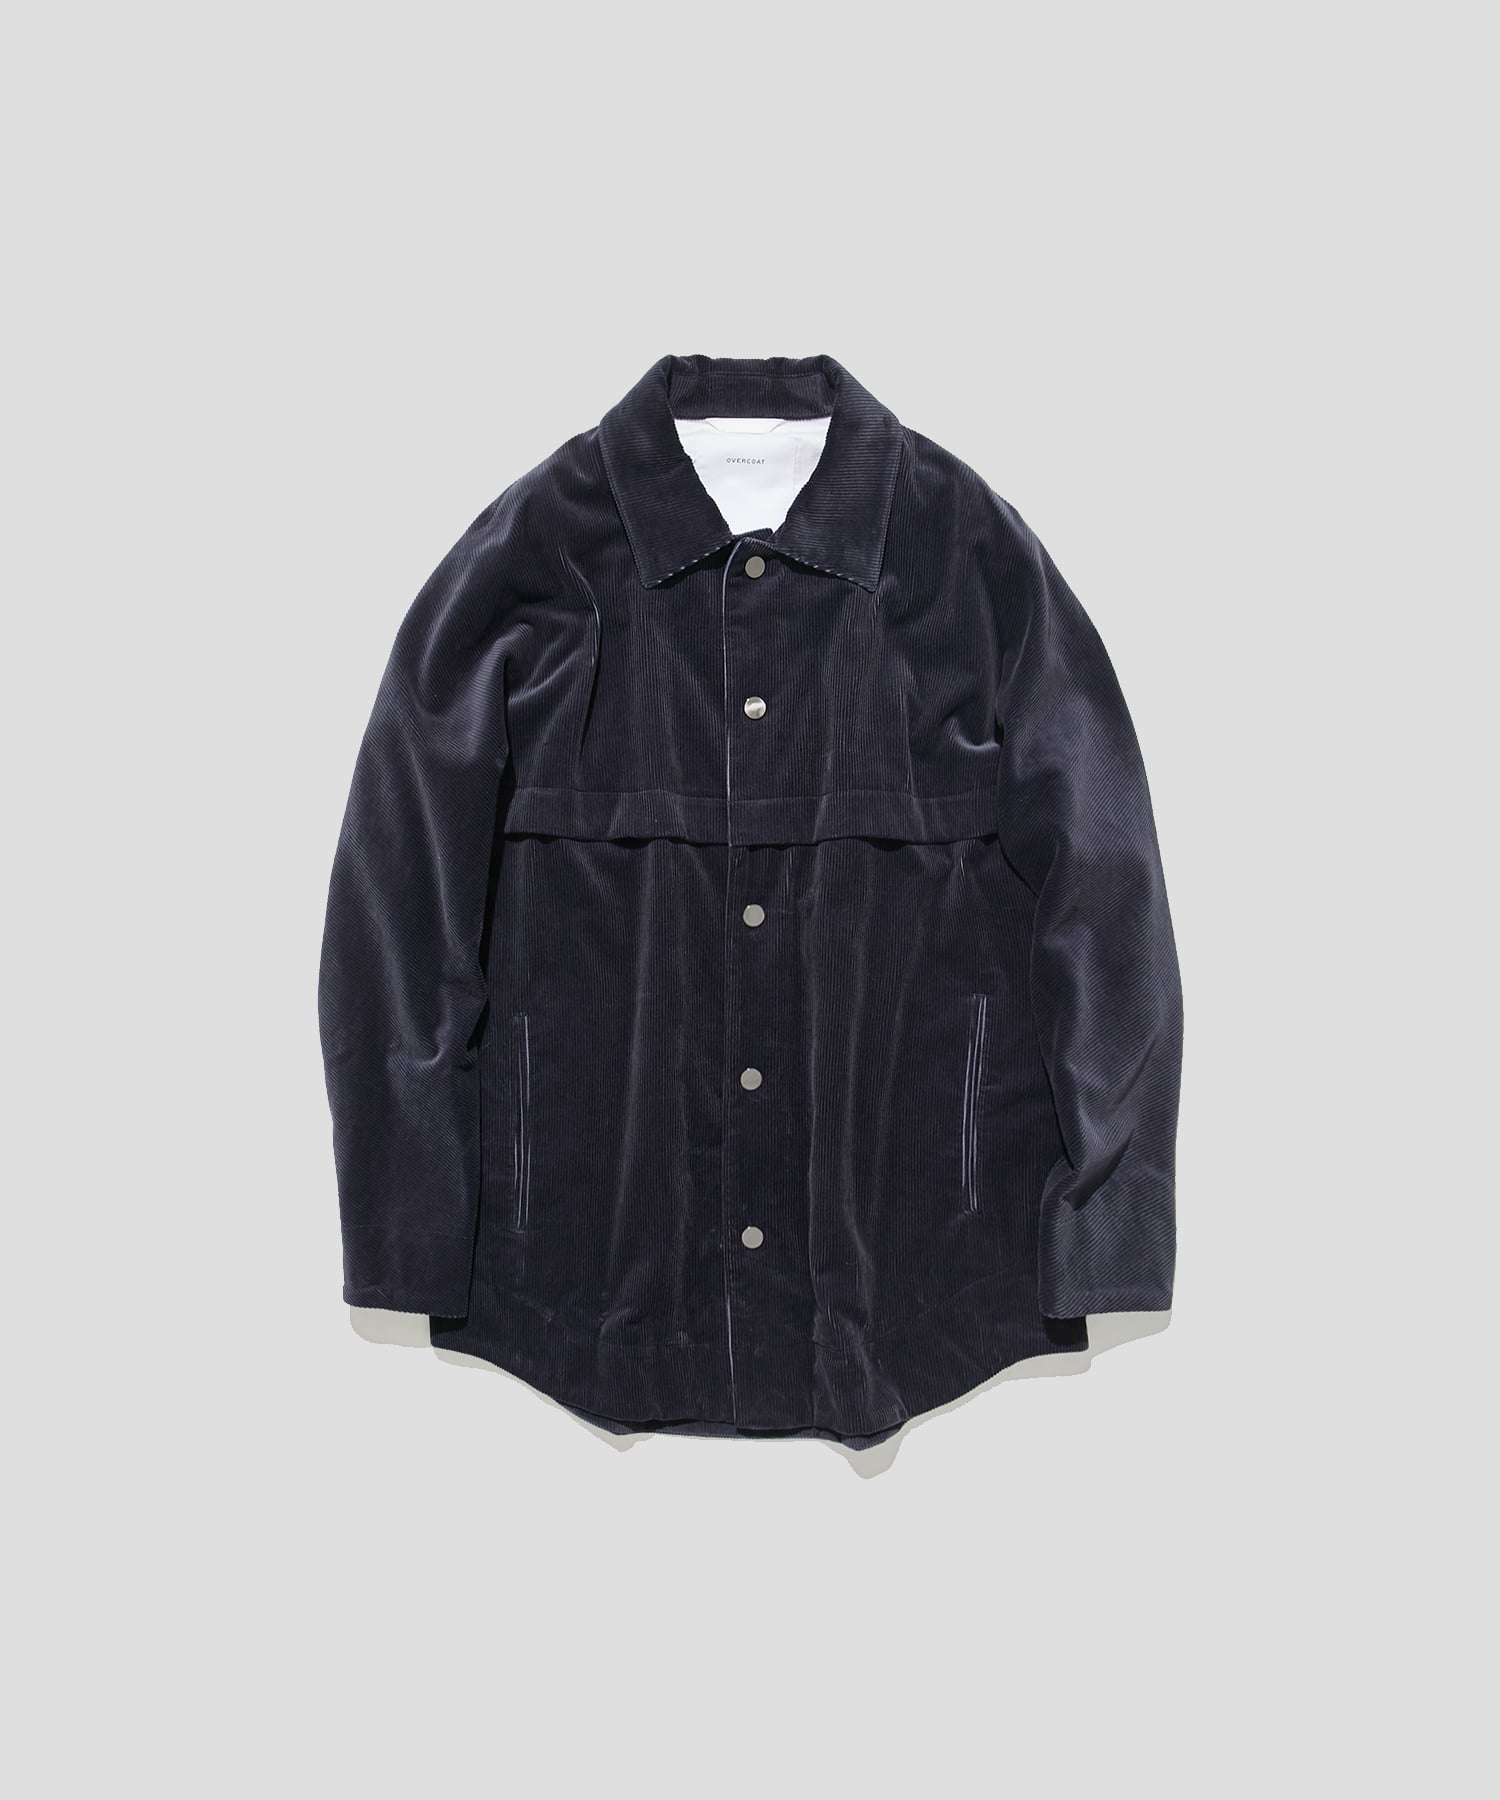 CAPE SHOULDER JACKET WITH CAMP COLLAR IN FINE CORDUROY